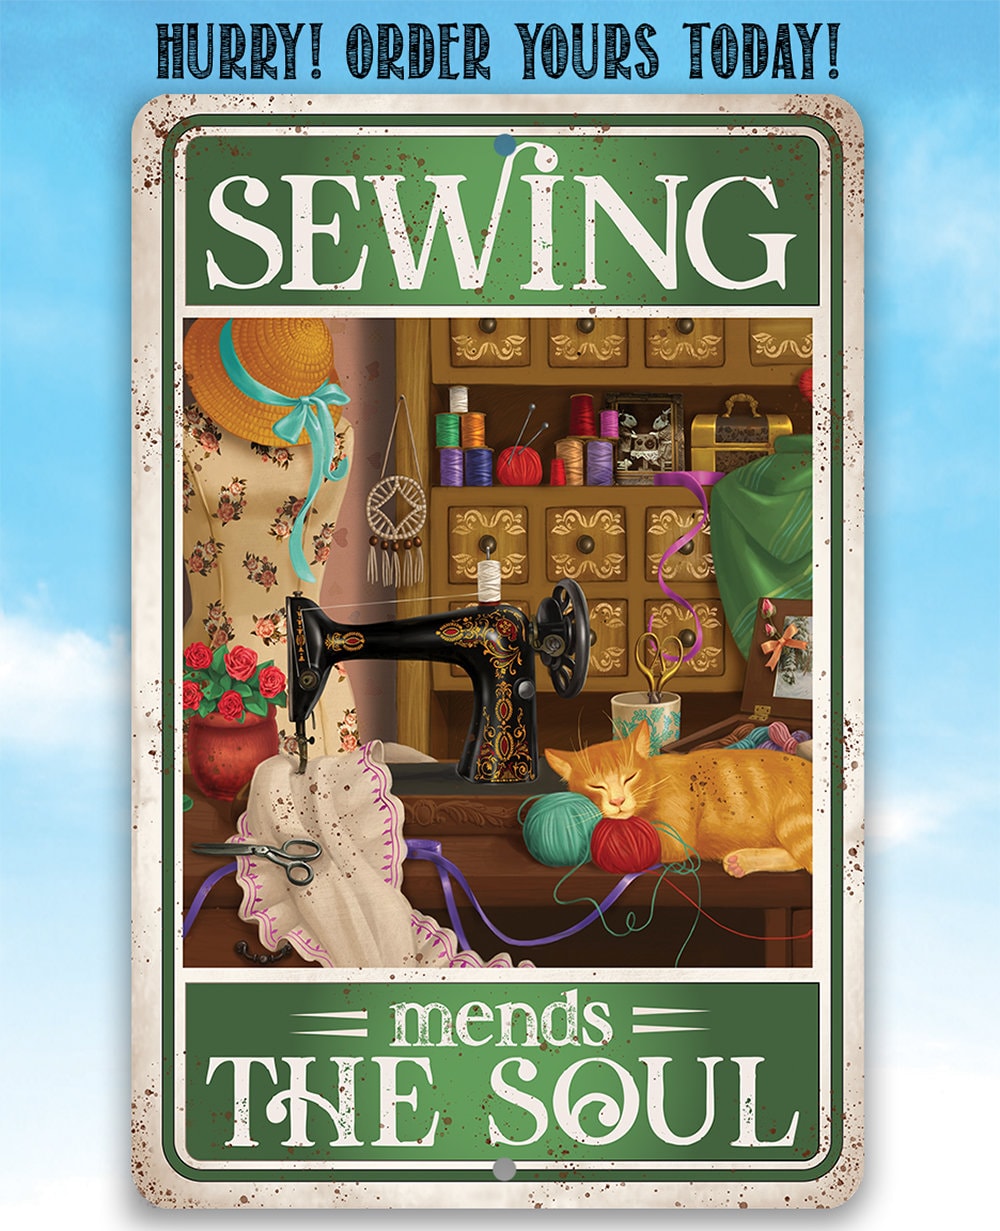 Sewing Mends The Soul 8" x 12" or 12" x 18" Aluminum Tin Awesome Metal Poster Lone Star Art 